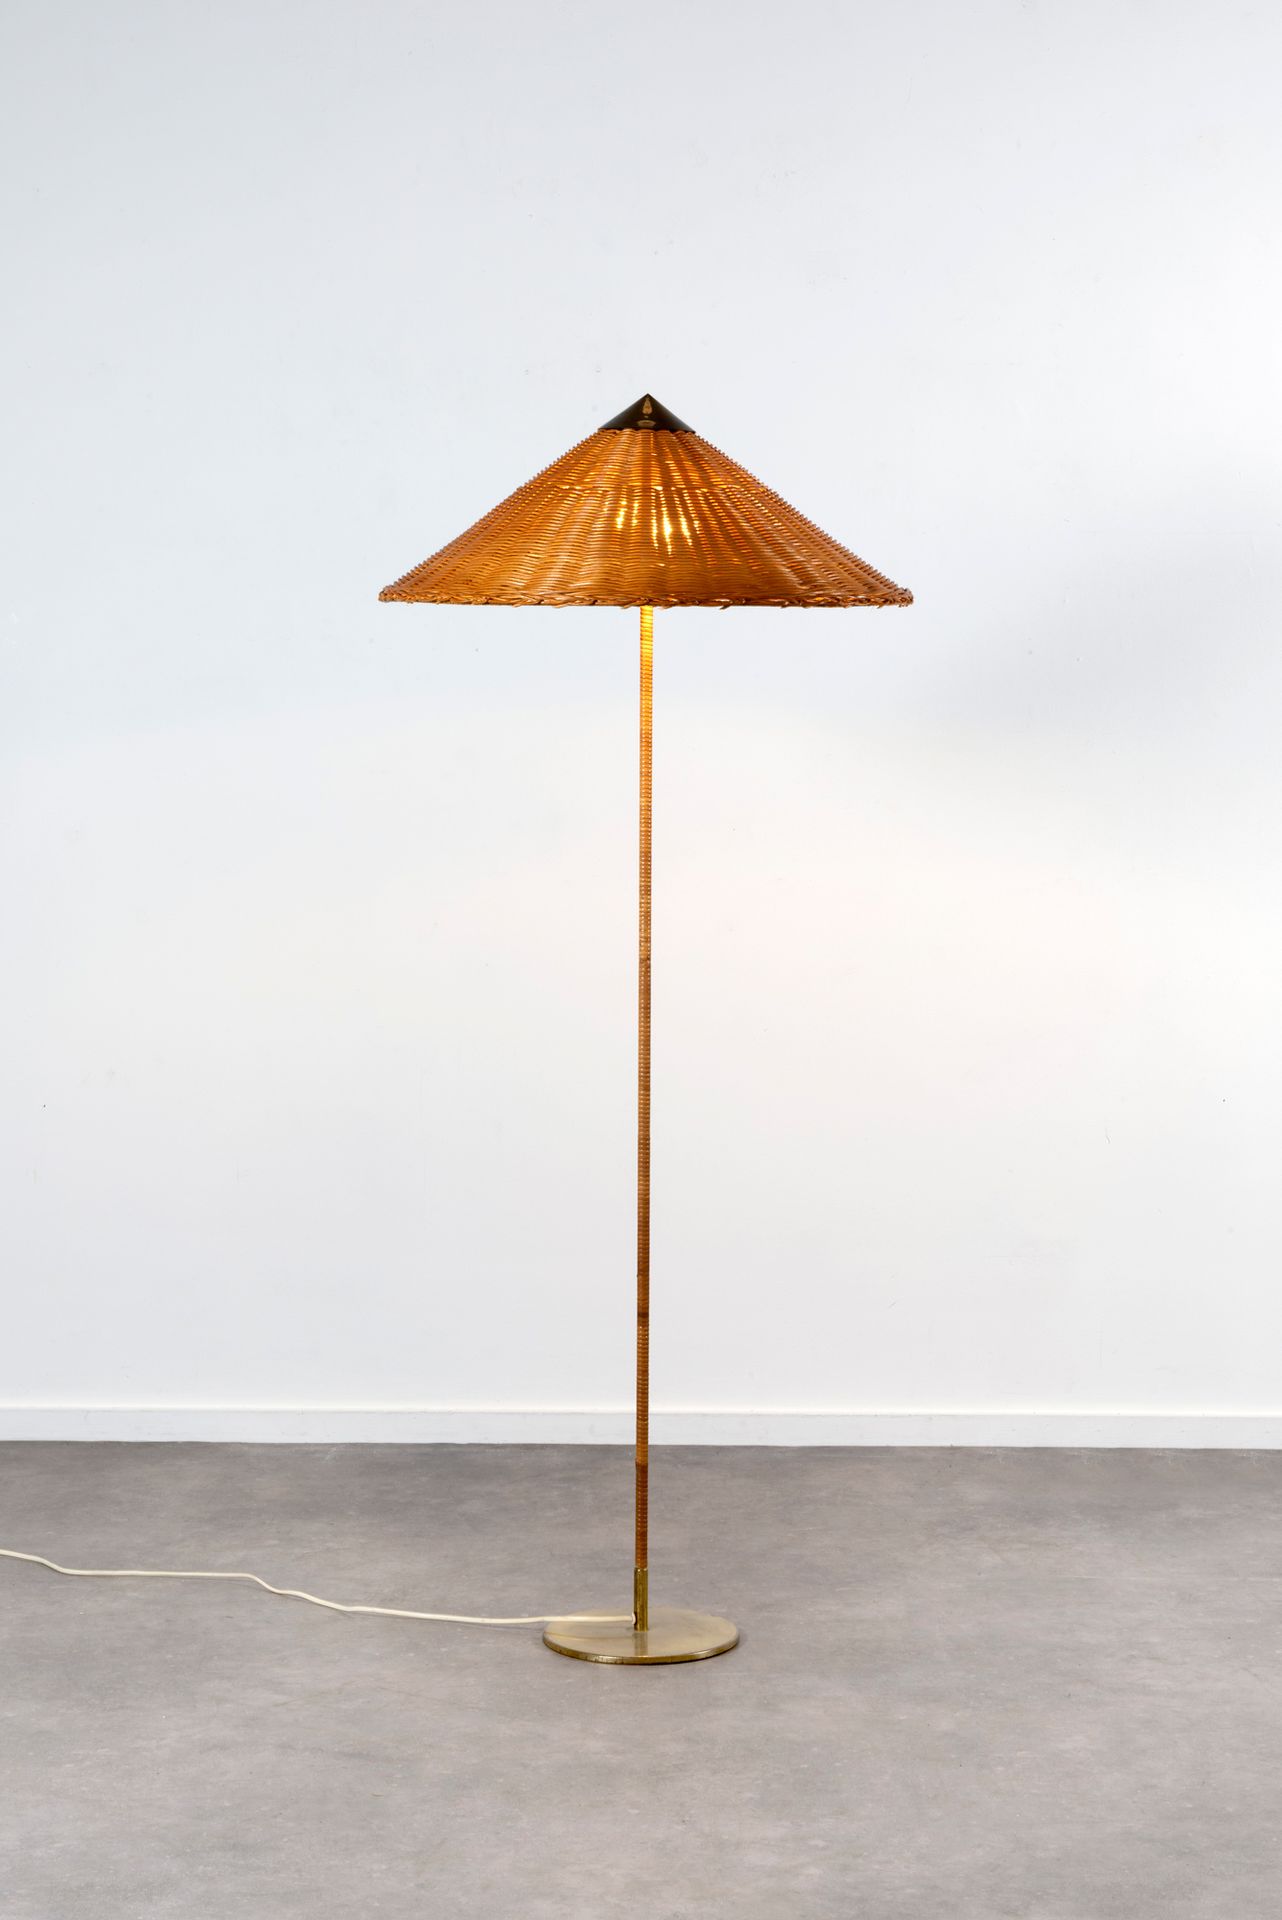 PAAVO TYNELL (1890-1973) Mod. N°9602 - Chinese hat
Lampadaire.
Base en fonte rec&hellip;